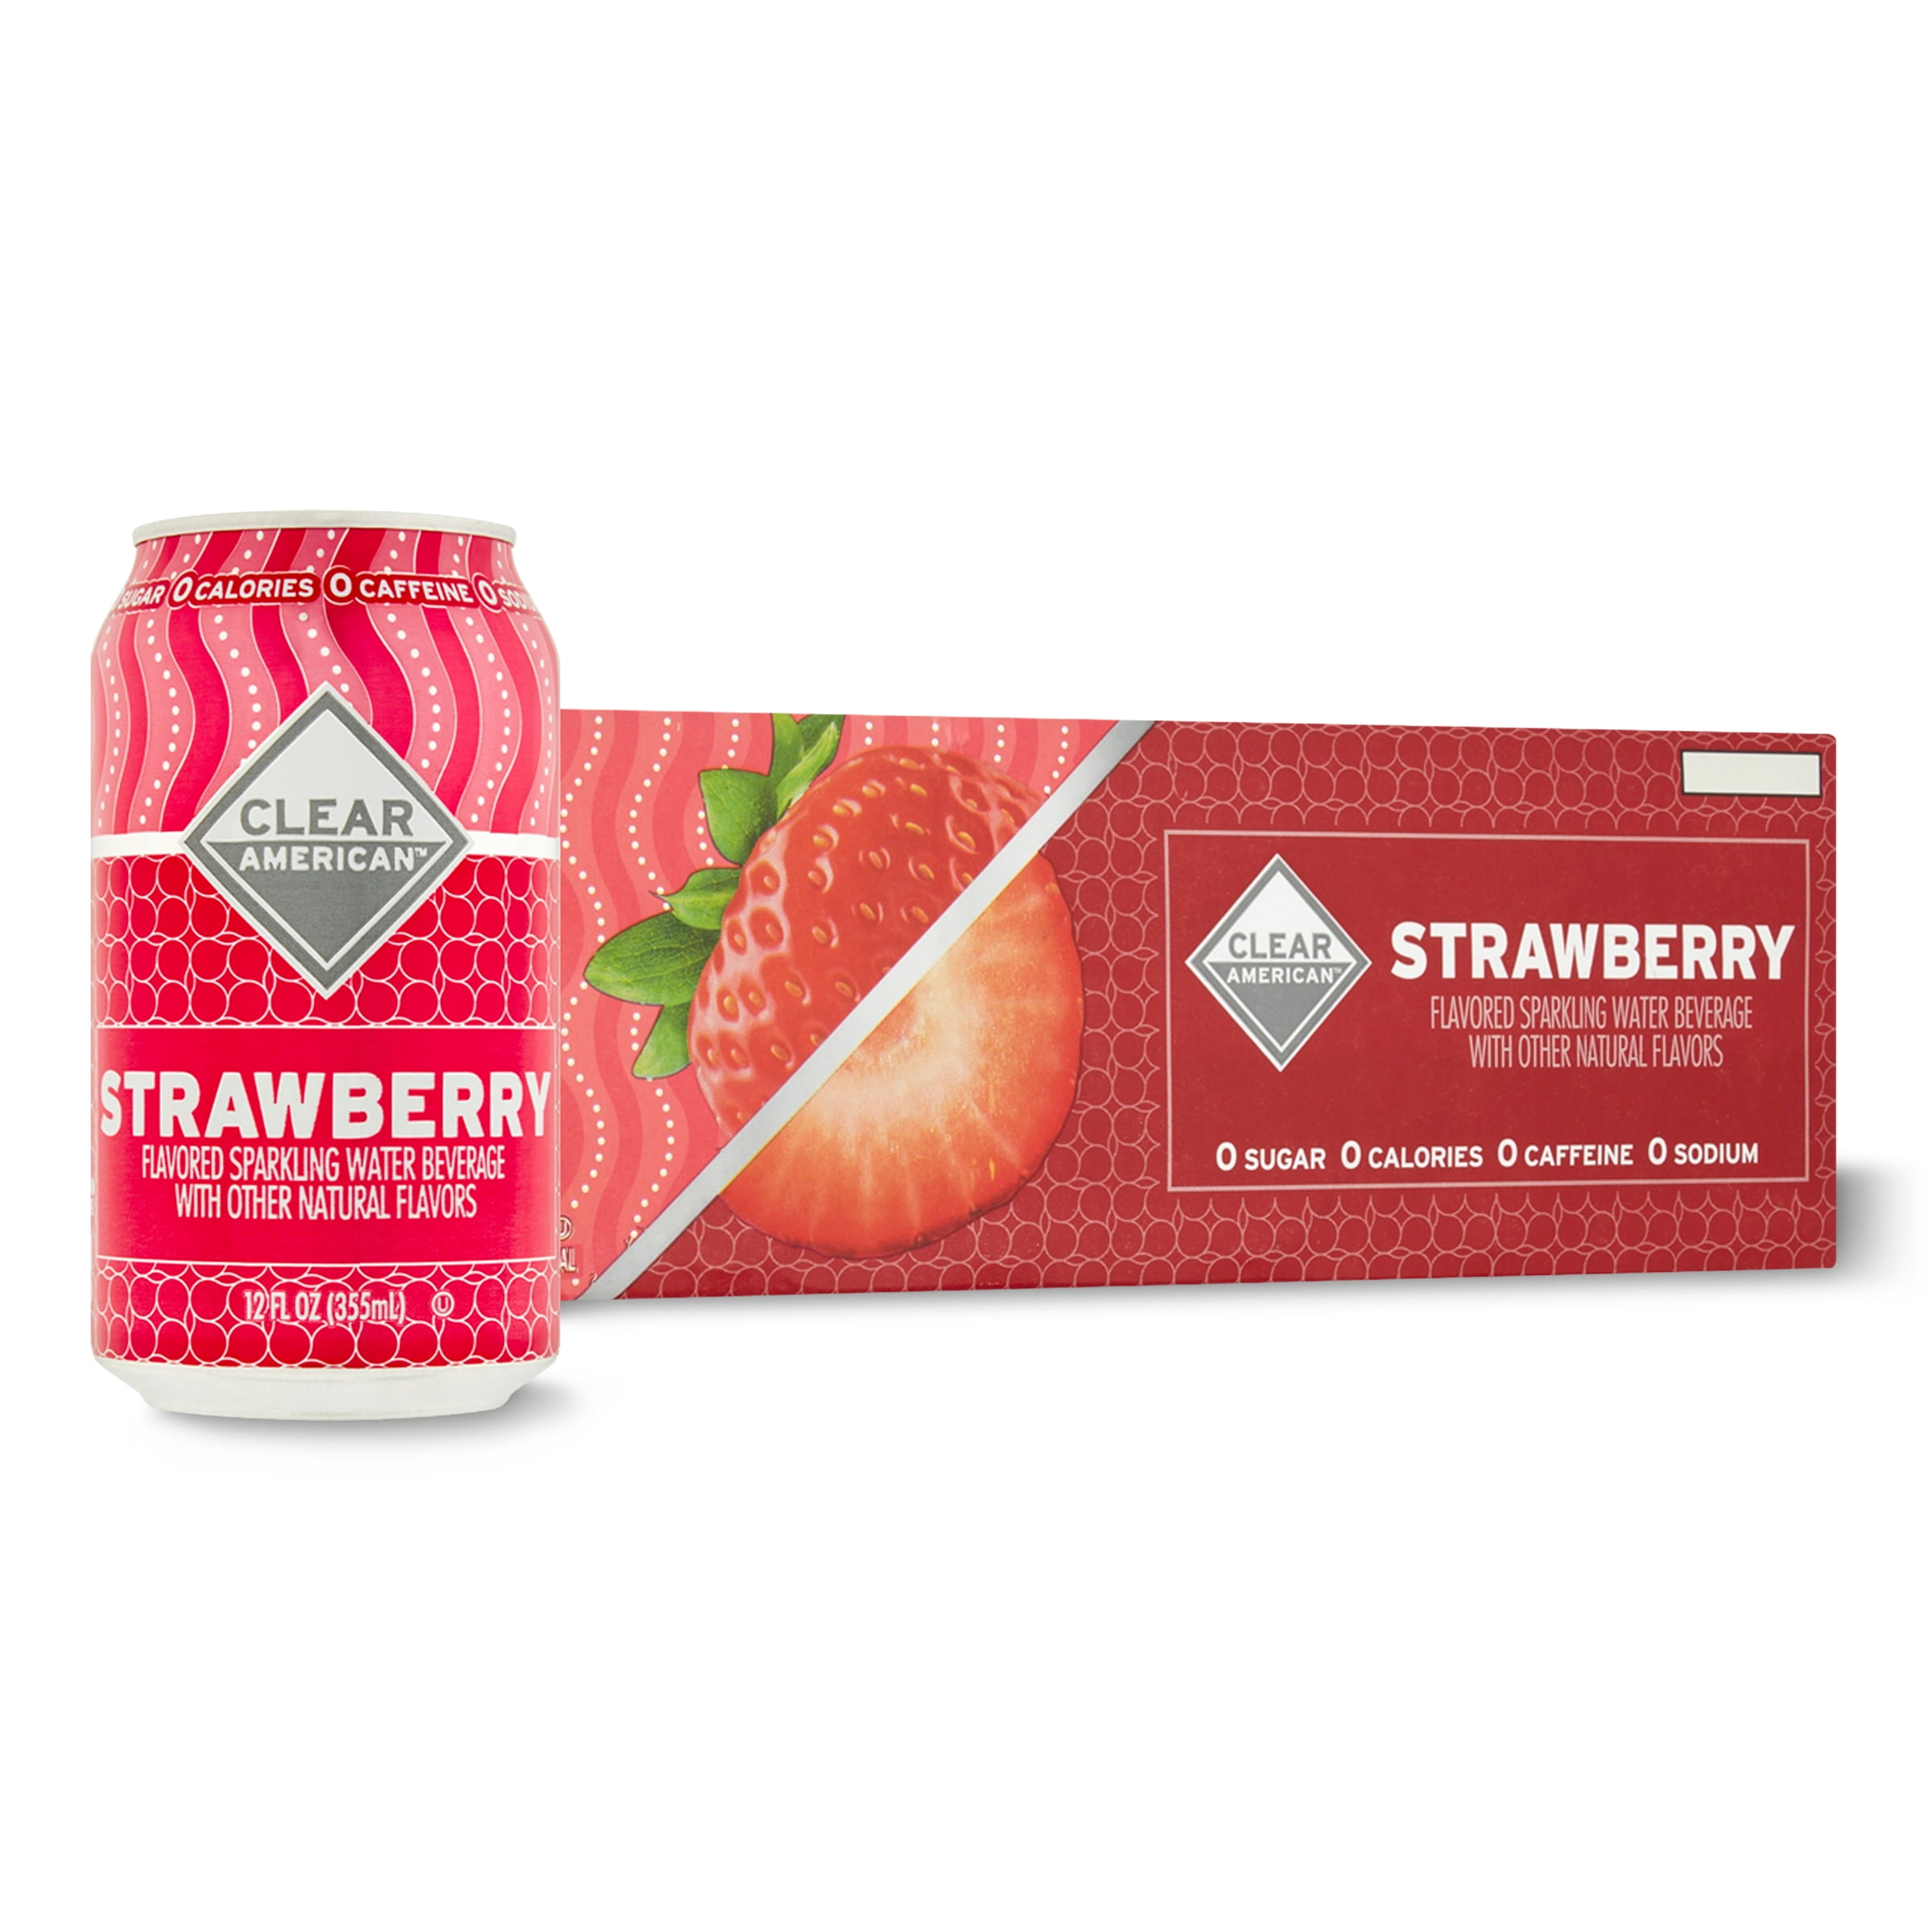 Clear American Strawberry Sparkling Water, 12 Fl Oz, 12 Pack Cans